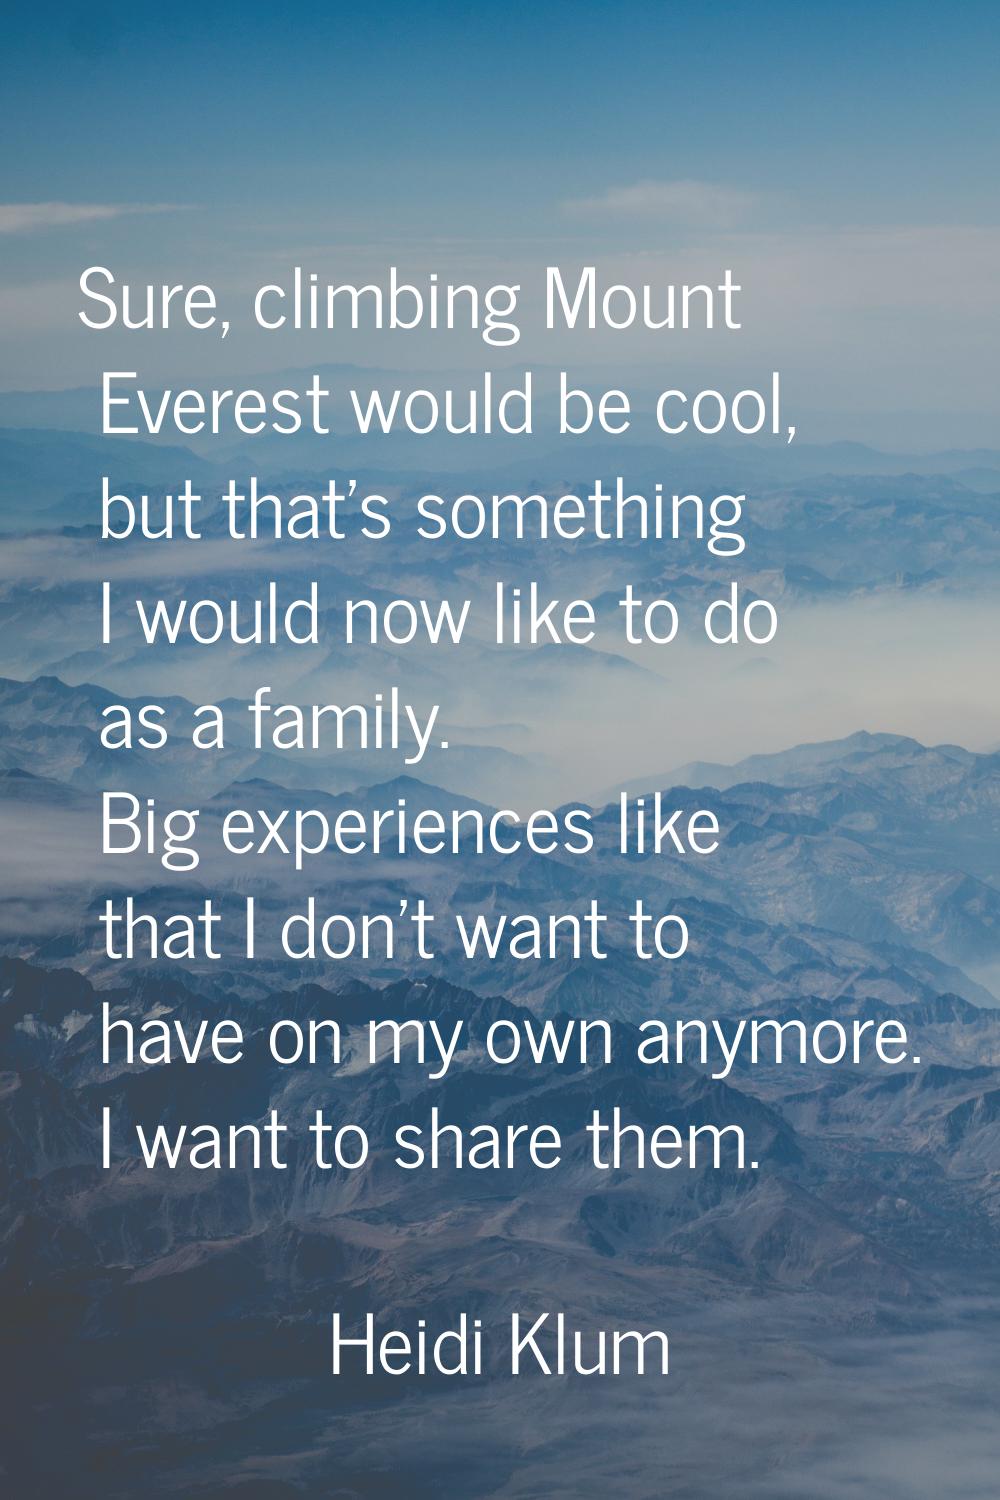 Sure, climbing Mount Everest would be cool, but that's something I would now like to do as a family